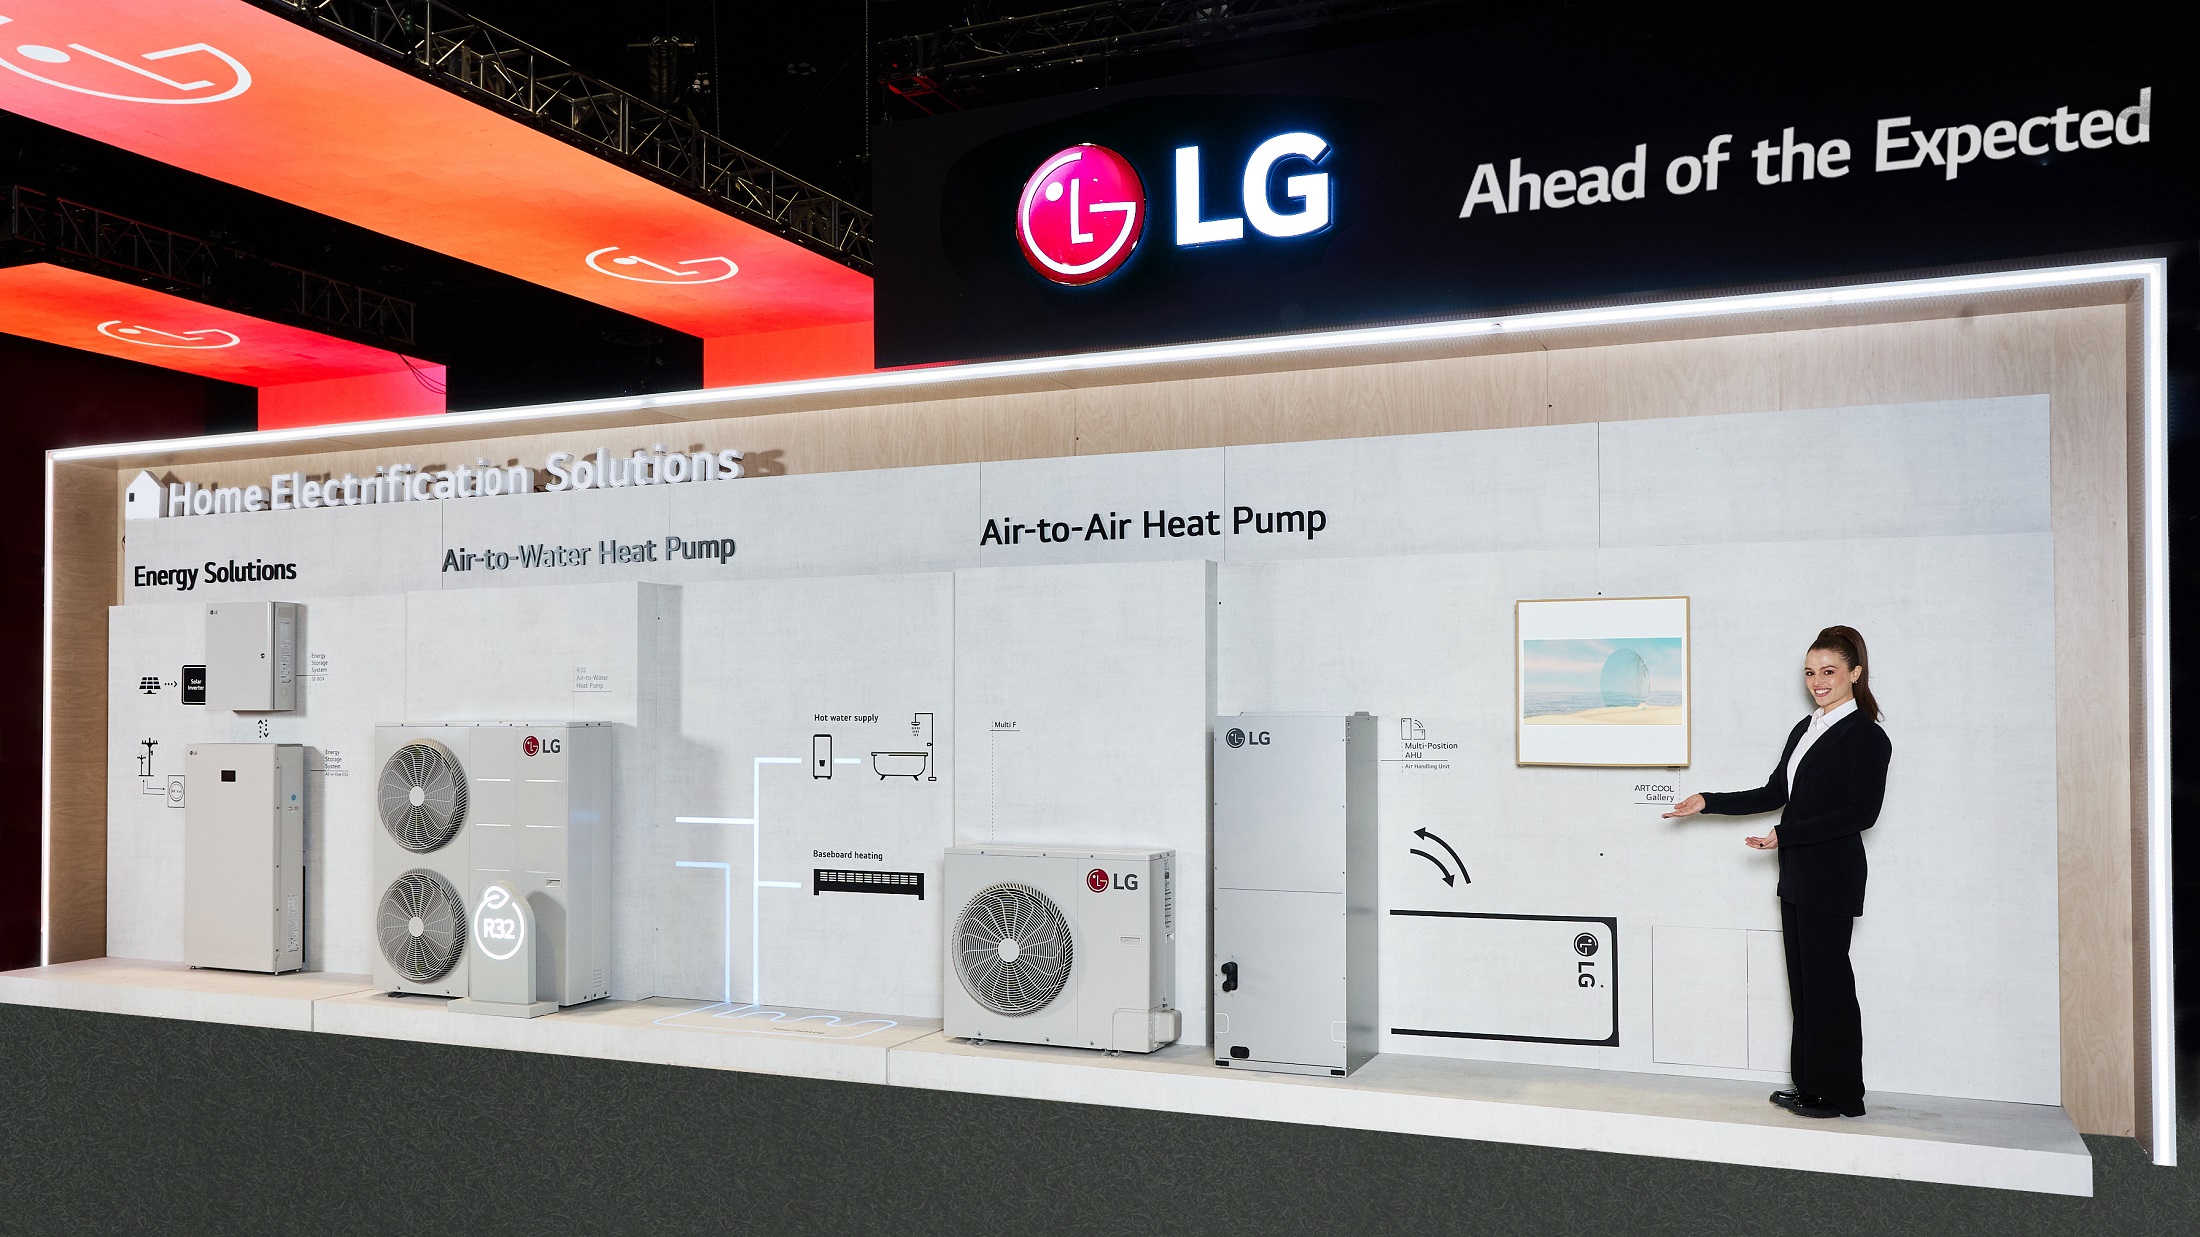 A photo of the LG Home Electrification Solutions Zone showcasing Energy Solutions, Air-to-Water Heat Pump, and Air-To-Air Heat Pump and a woman standing inside at AHR Expo 2024